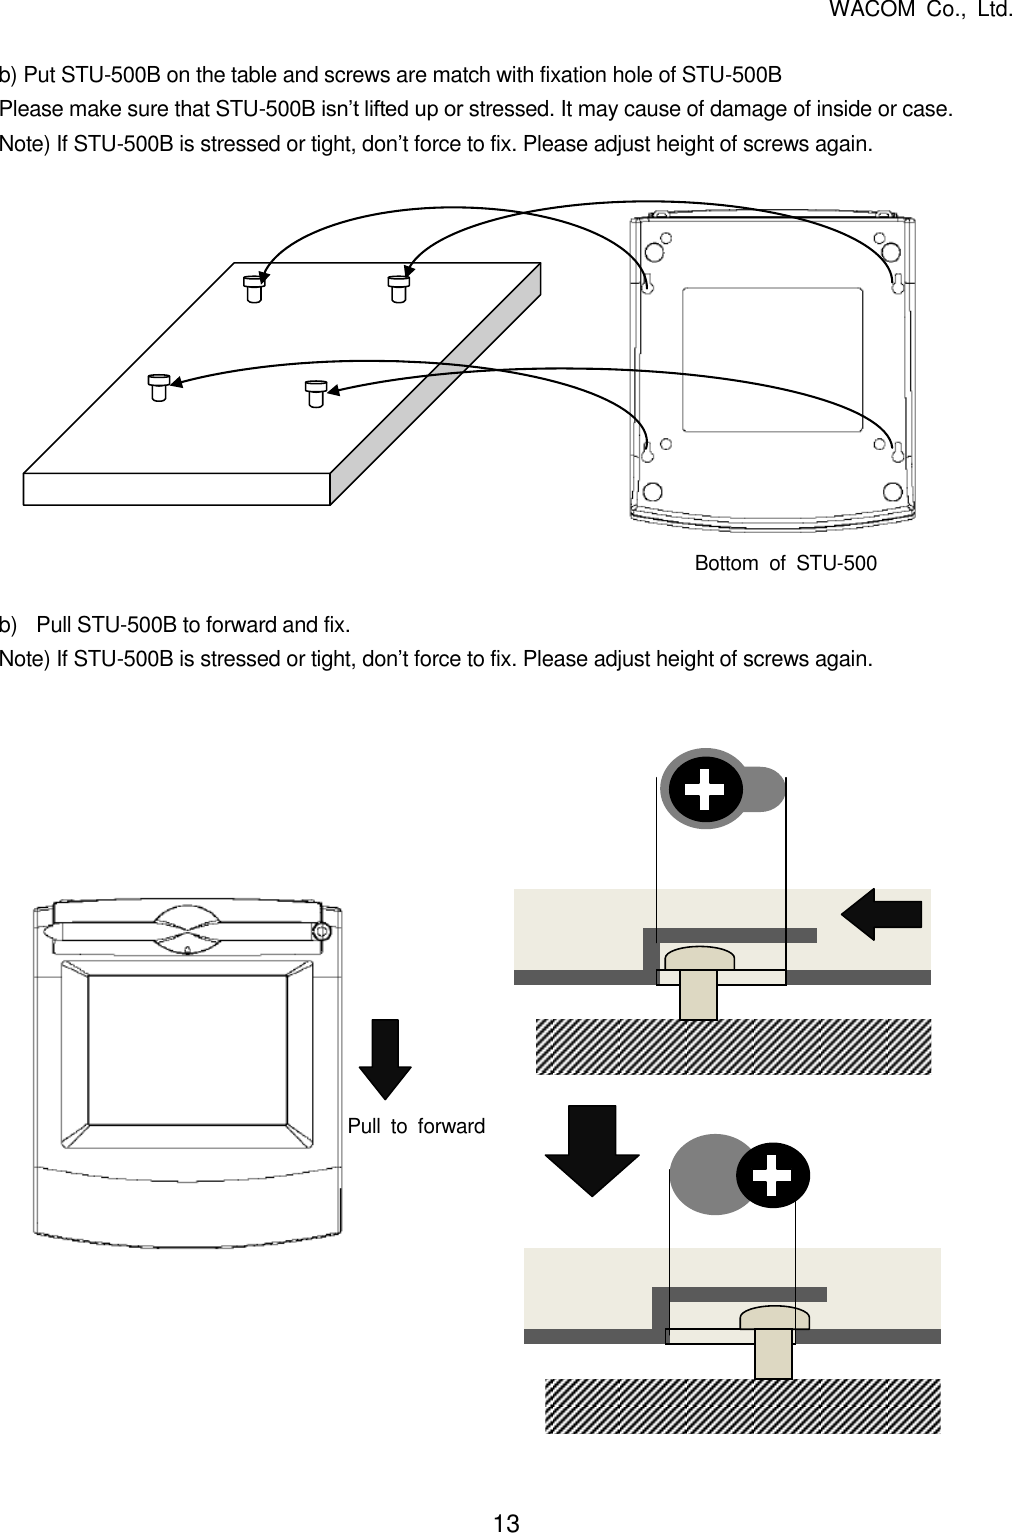   WACOM  Co.,  Ltd. 13   b) Put STU-500B on the table and screws are match with fixation hole of STU-500B Please make sure that STU-500B isn’t lifted up or stressed. It may cause of damage of inside or case. Note) If STU-500B is stressed or tight, don’t force to fix. Please adjust height of screws again.              b)  Pull STU-500B to forward and fix. Note) If STU-500B is stressed or tight, don’t force to fix. Please adjust height of screws again.                      Bottom  of  STU-500 Pull  to  forward 